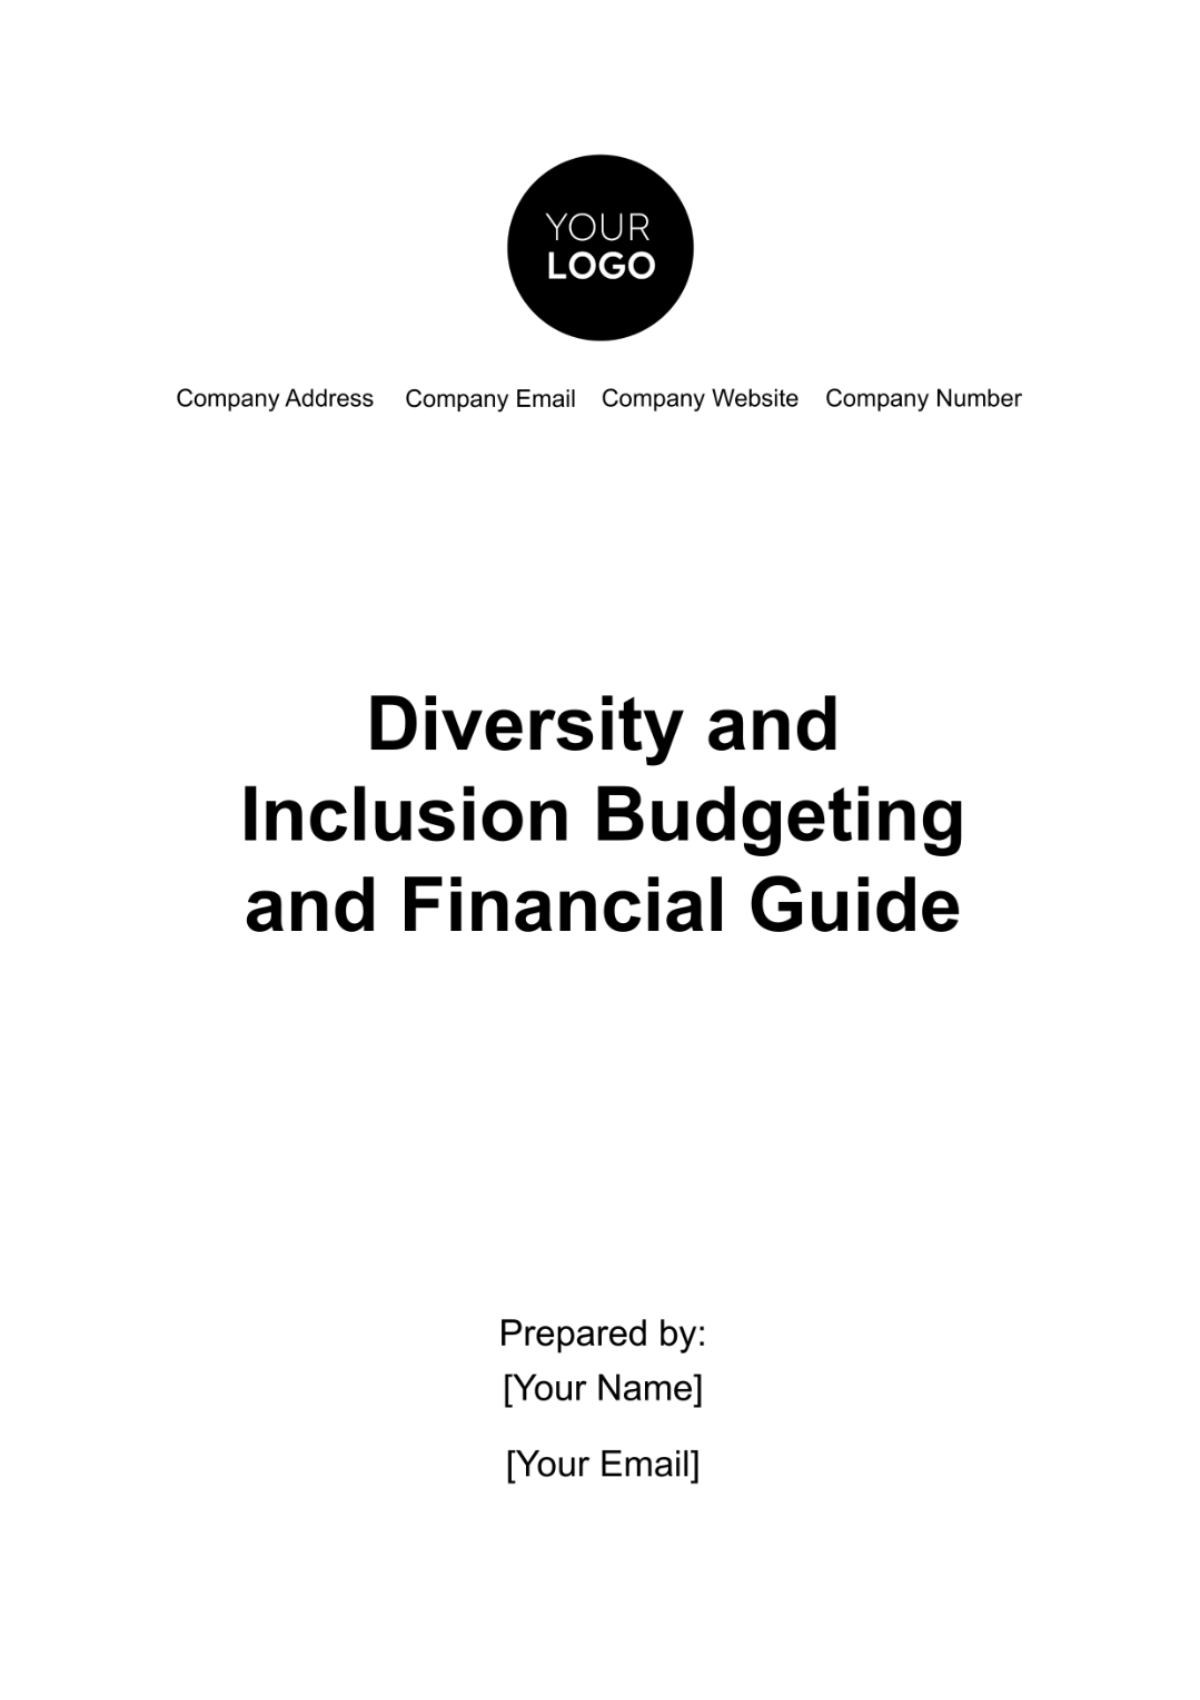 Free Diversity and Inclusion Budgeting and Financial Planning Guide HR Template